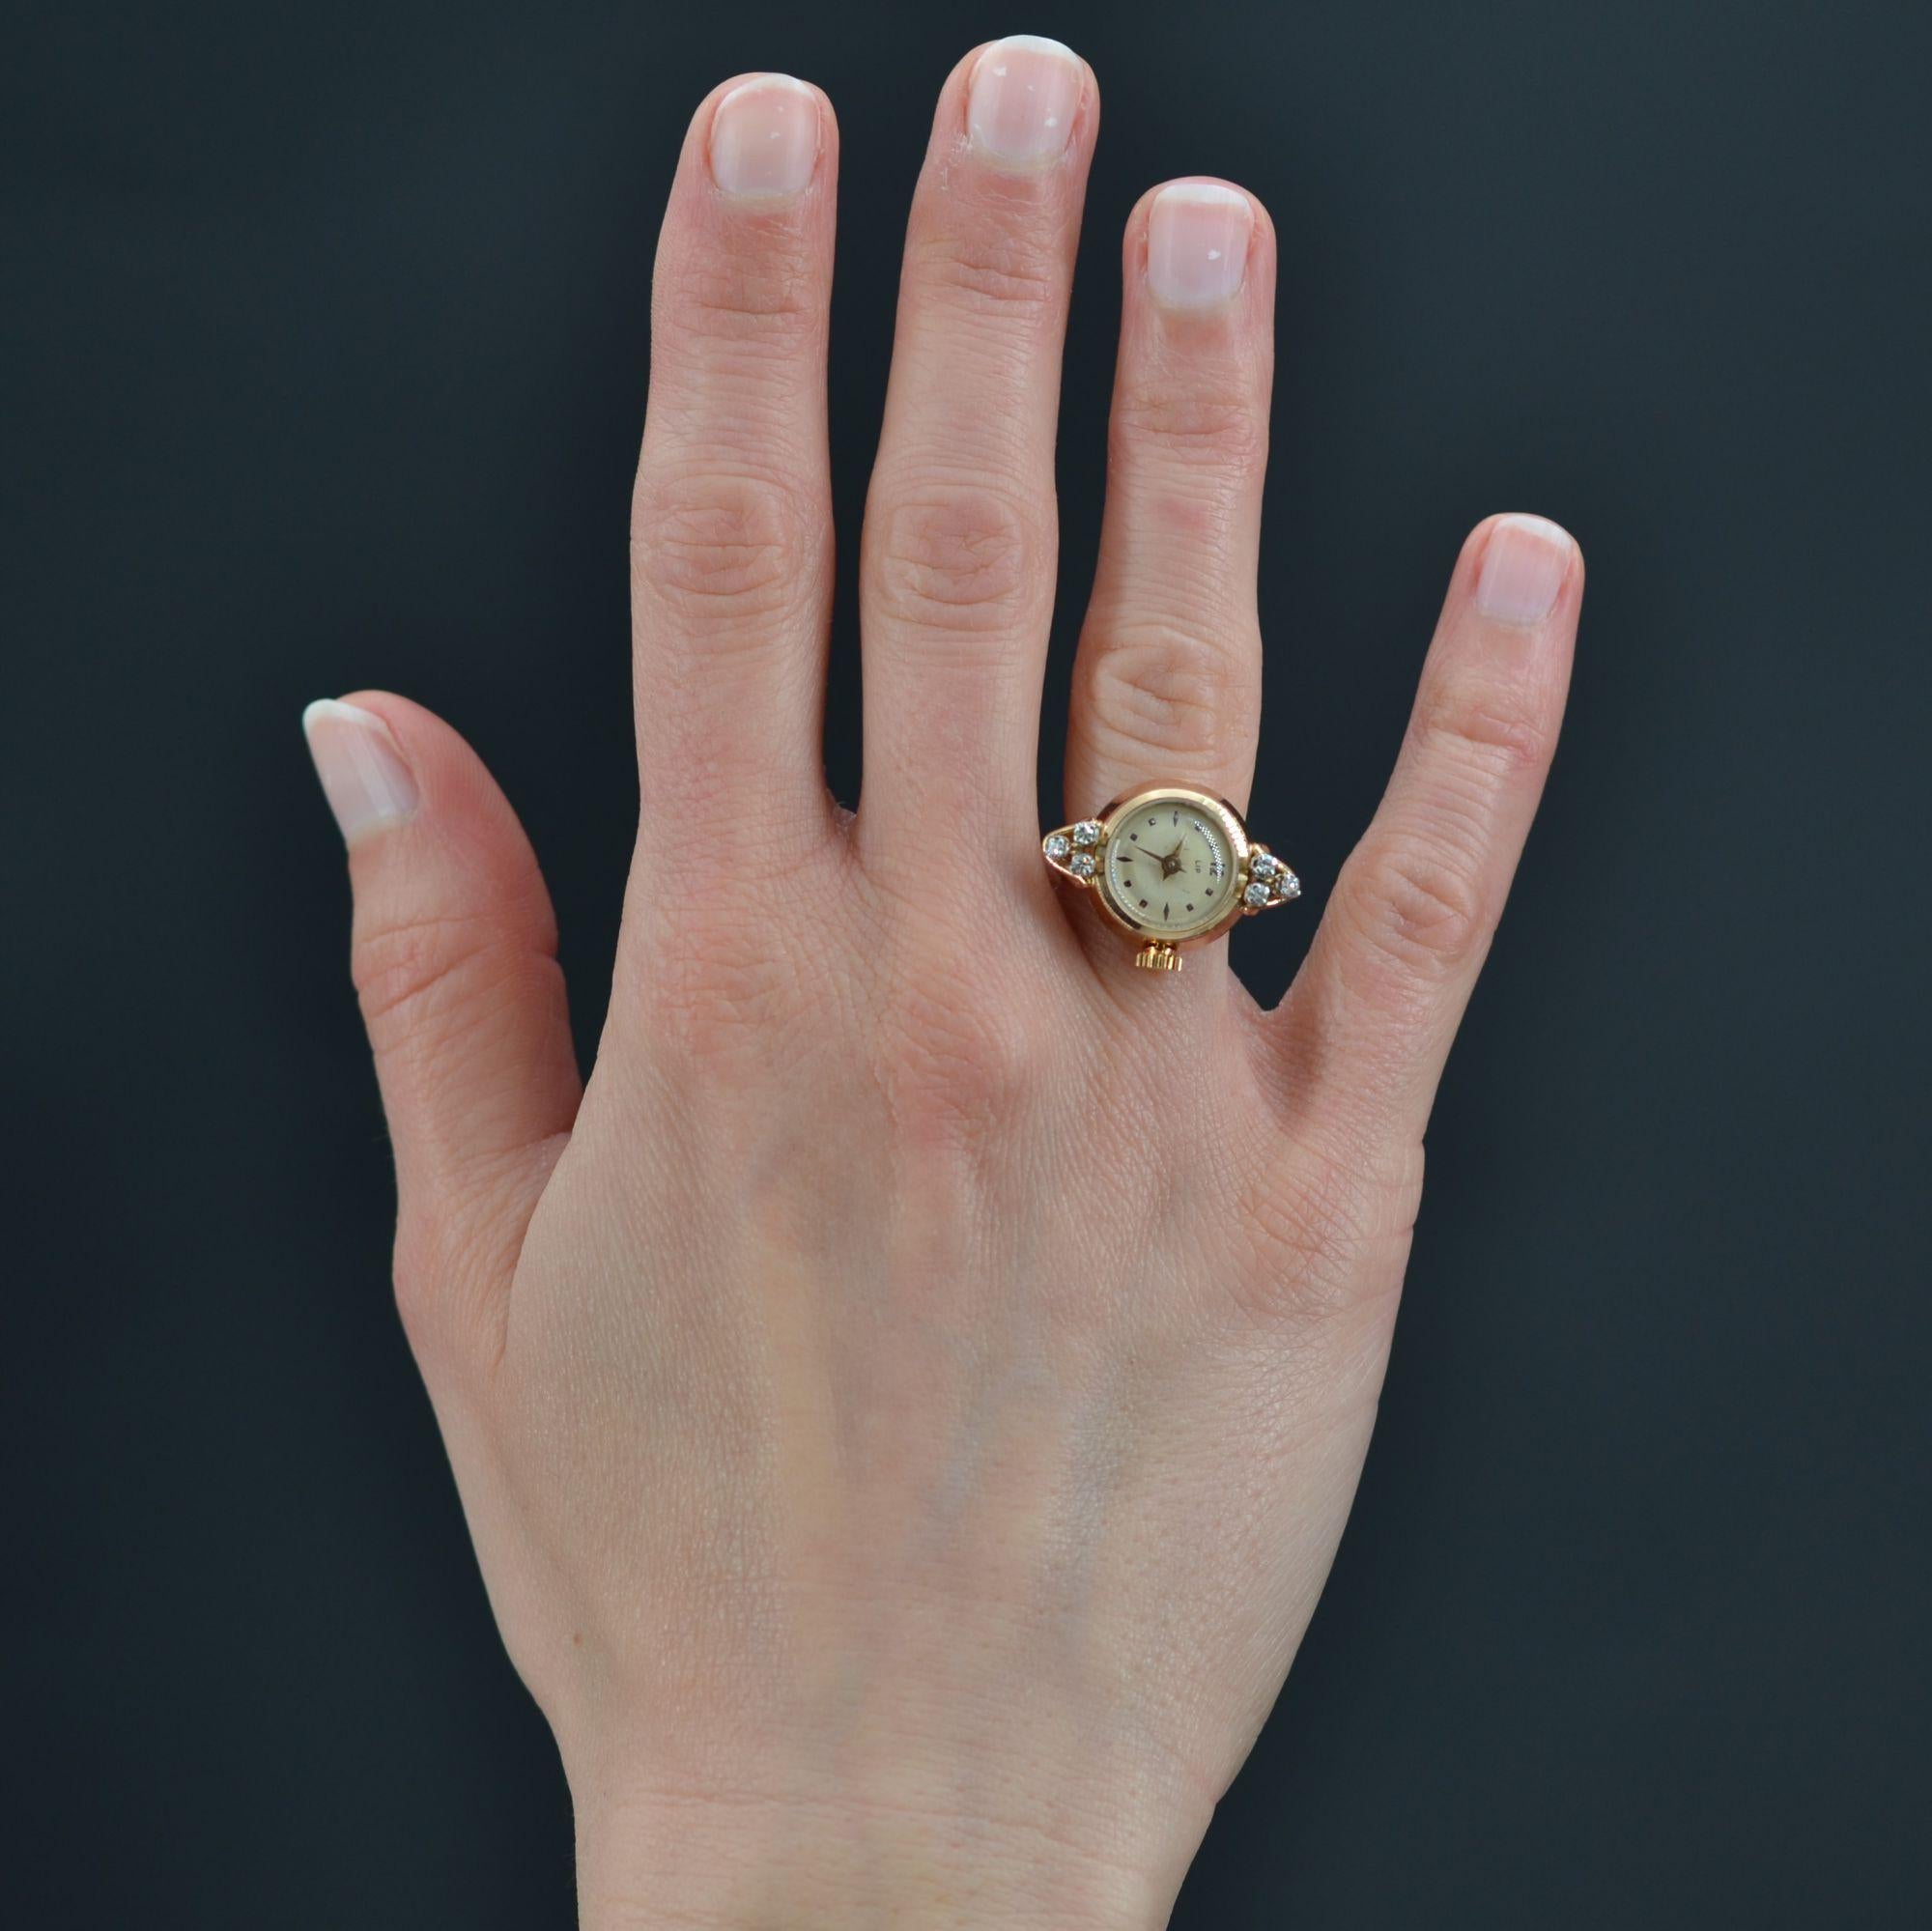 Ring in 18 karat yellow gold, hallmark owl.
Antique watch ring it presents a round case surmounted by 2 x 3 8/8- cut diamonds. The back of the watch is cream colored with some small marks of time. The antique watch is signed LIP and the back of the